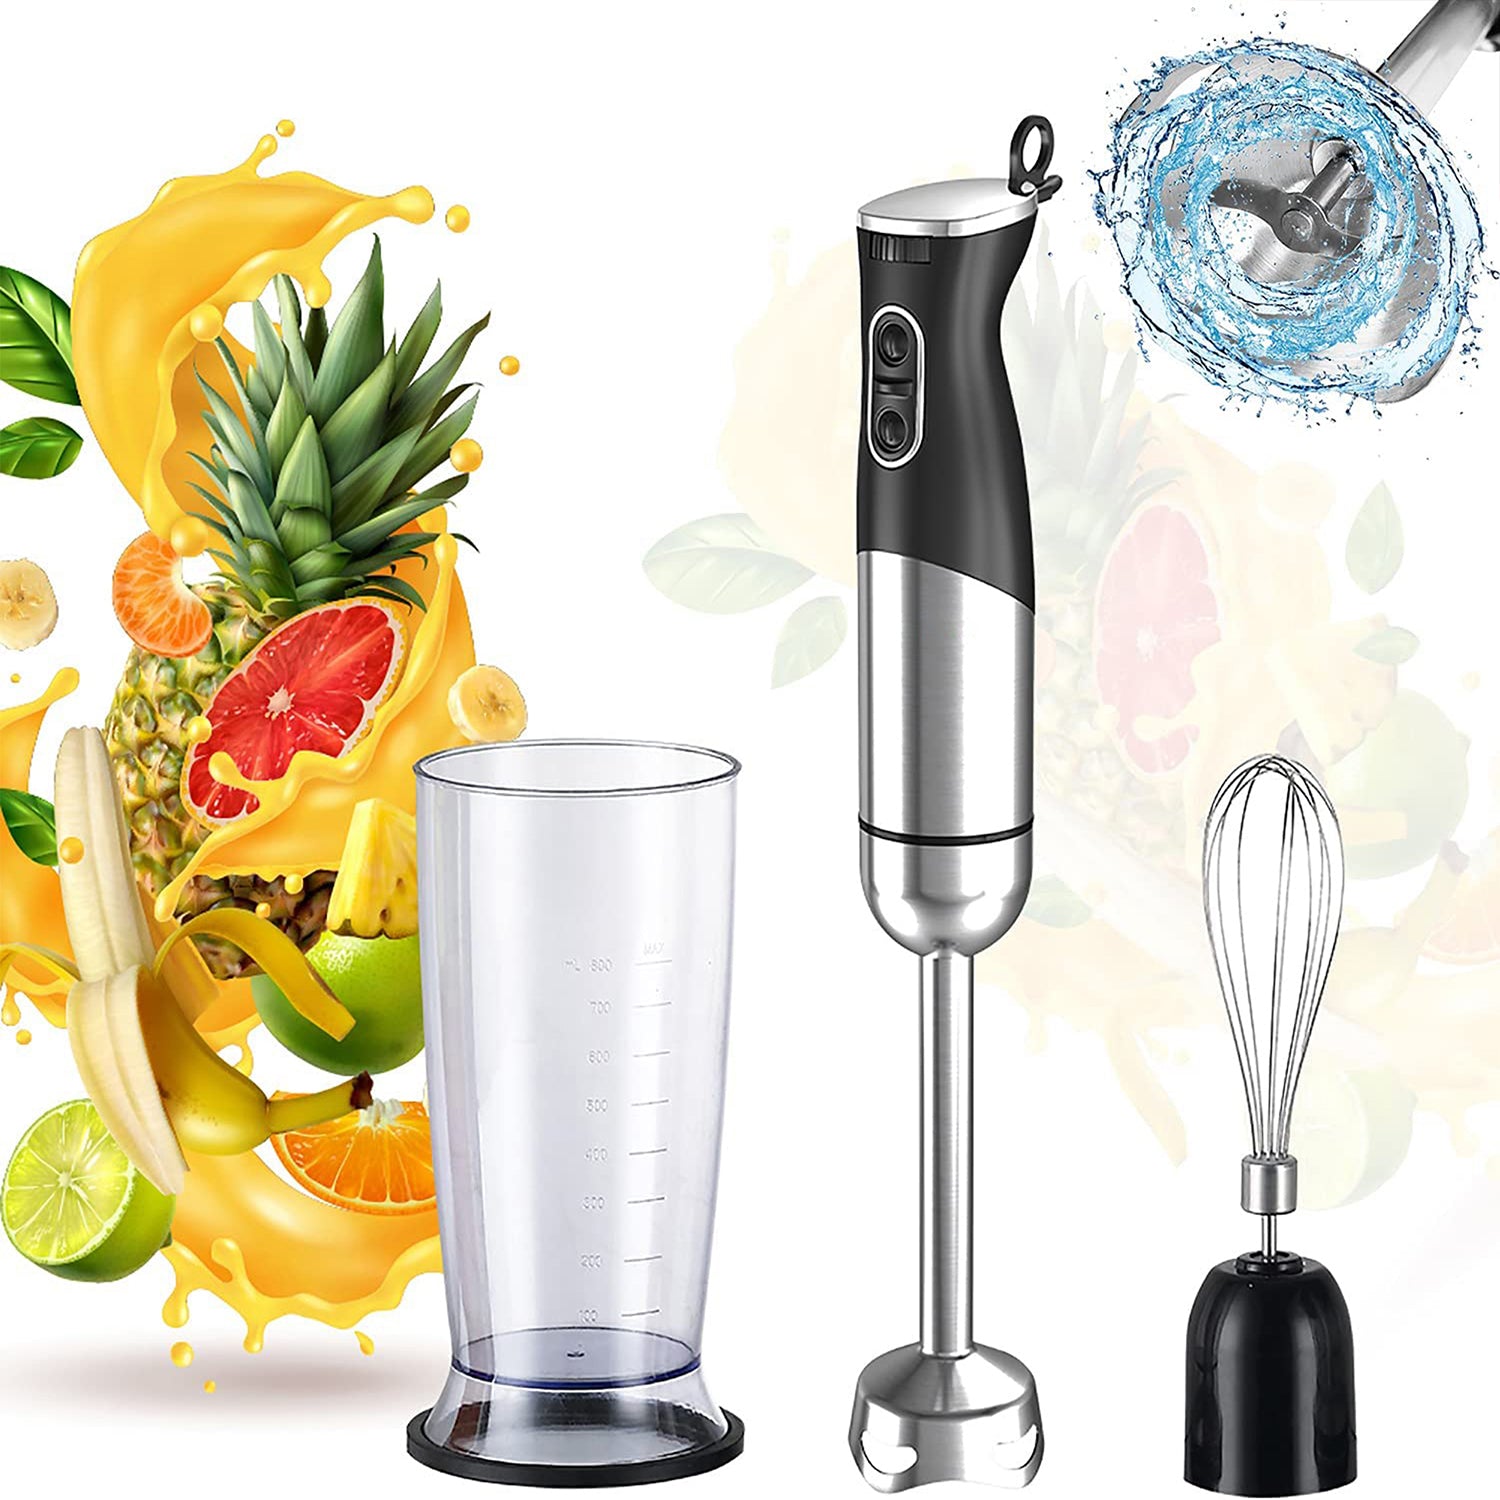 5 Core Immersion Hand Blender 400/500W Electric Hand Mixer Whisk w 2 Mixing Speed 304 Steel Blades